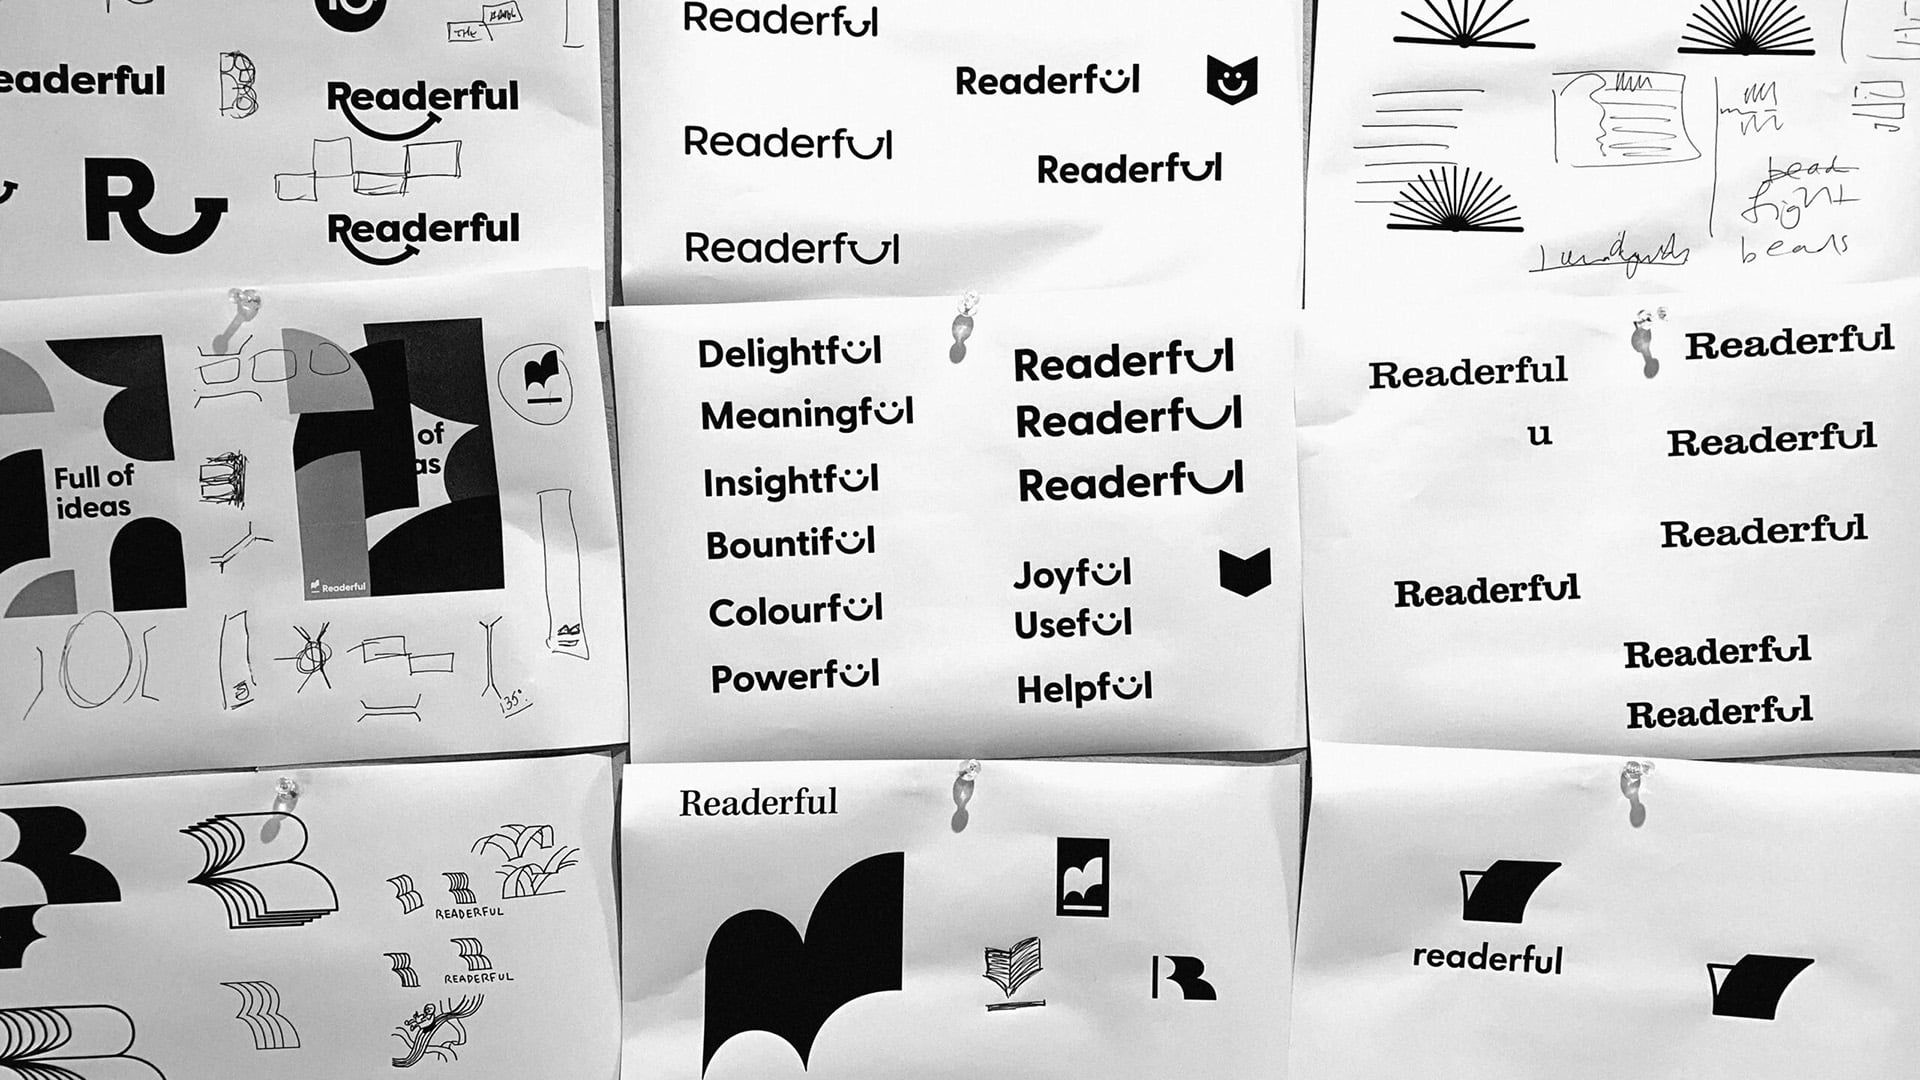 Early design sketches of Readerful logo concepts